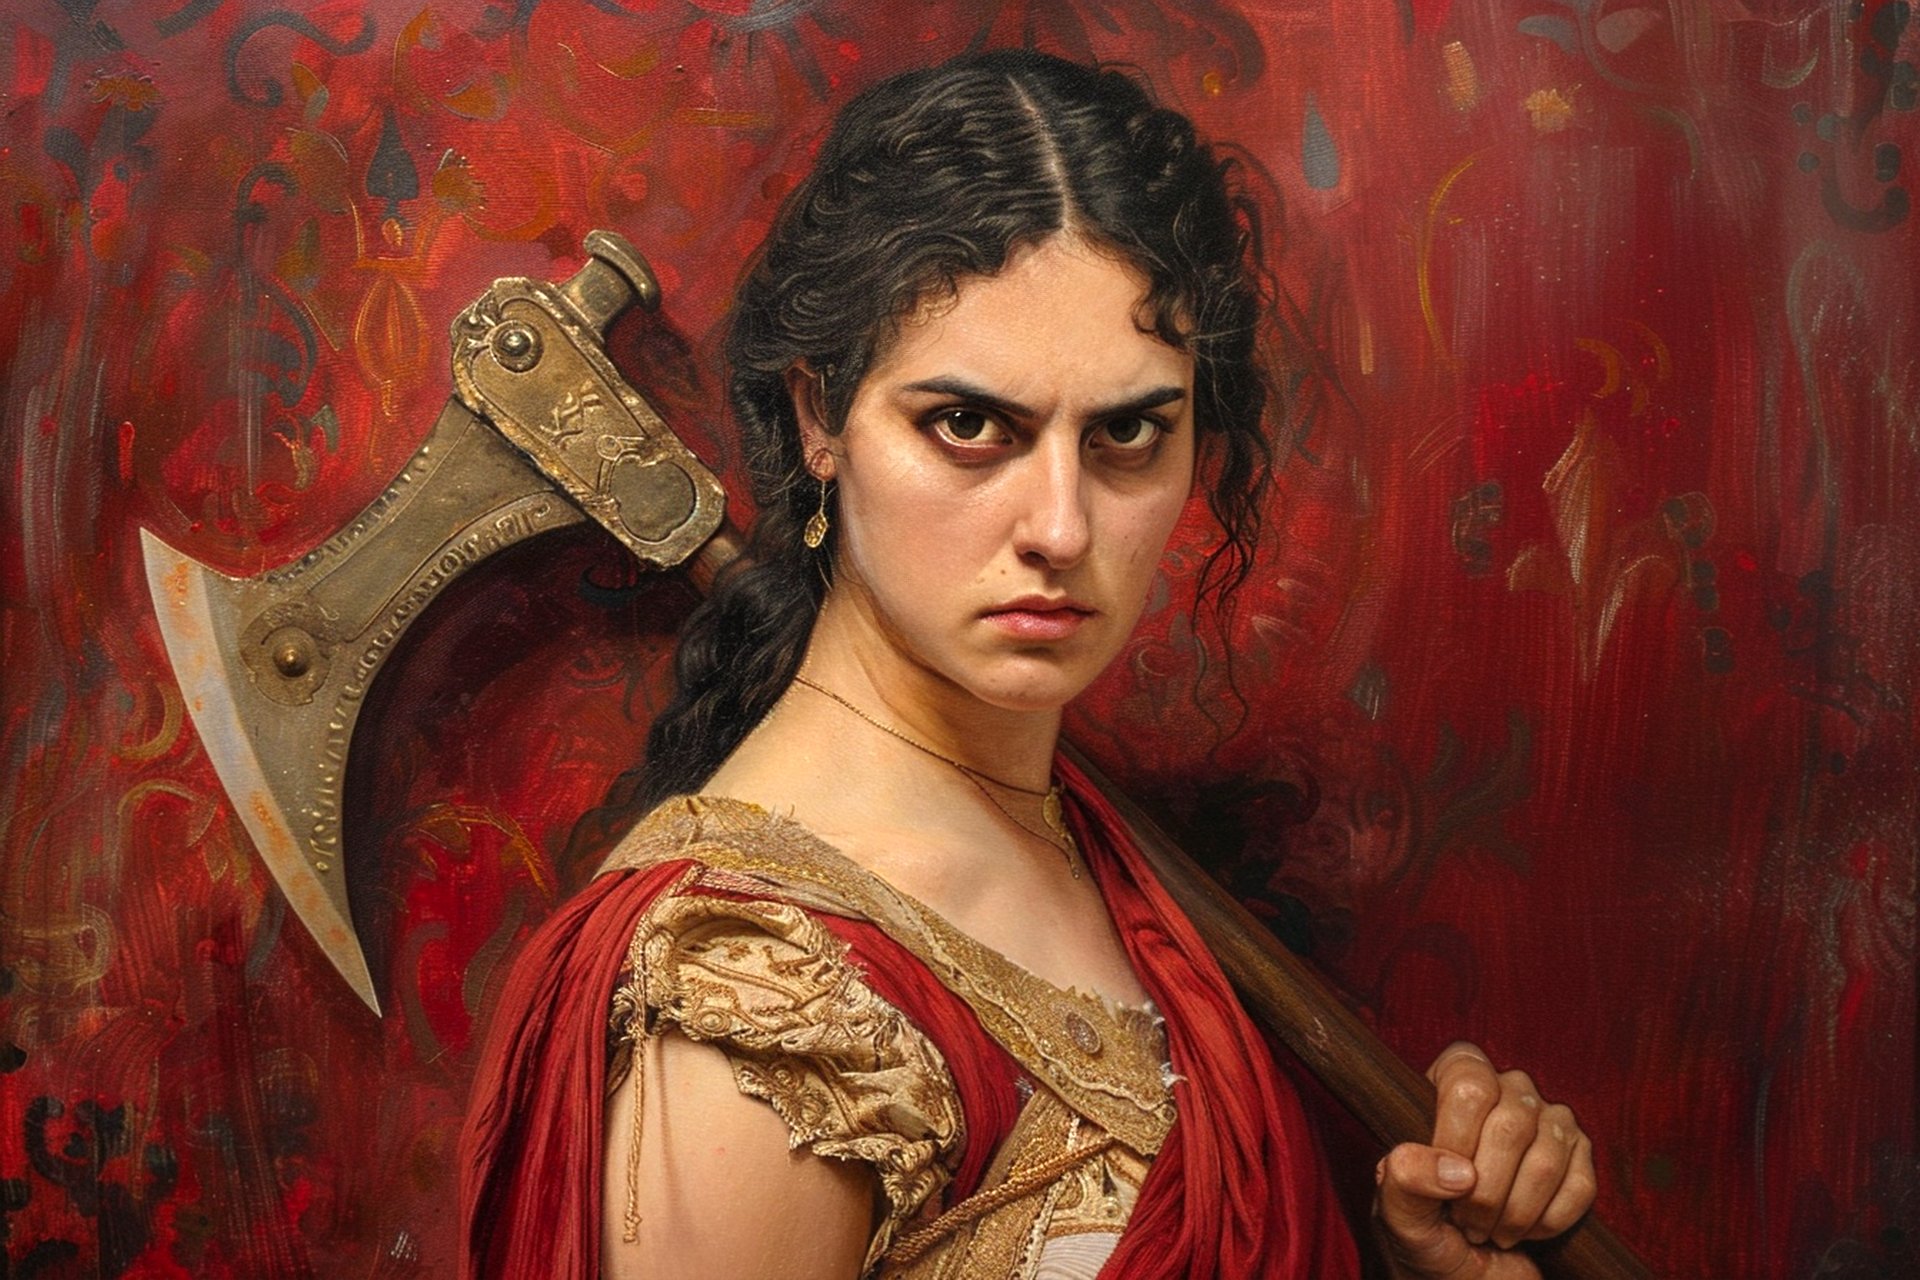 A painting of Clytemnestra, gripping an axe with determination, her expression fierce and resolute against a chaotic red backdrop, capturing the complexity of her character.